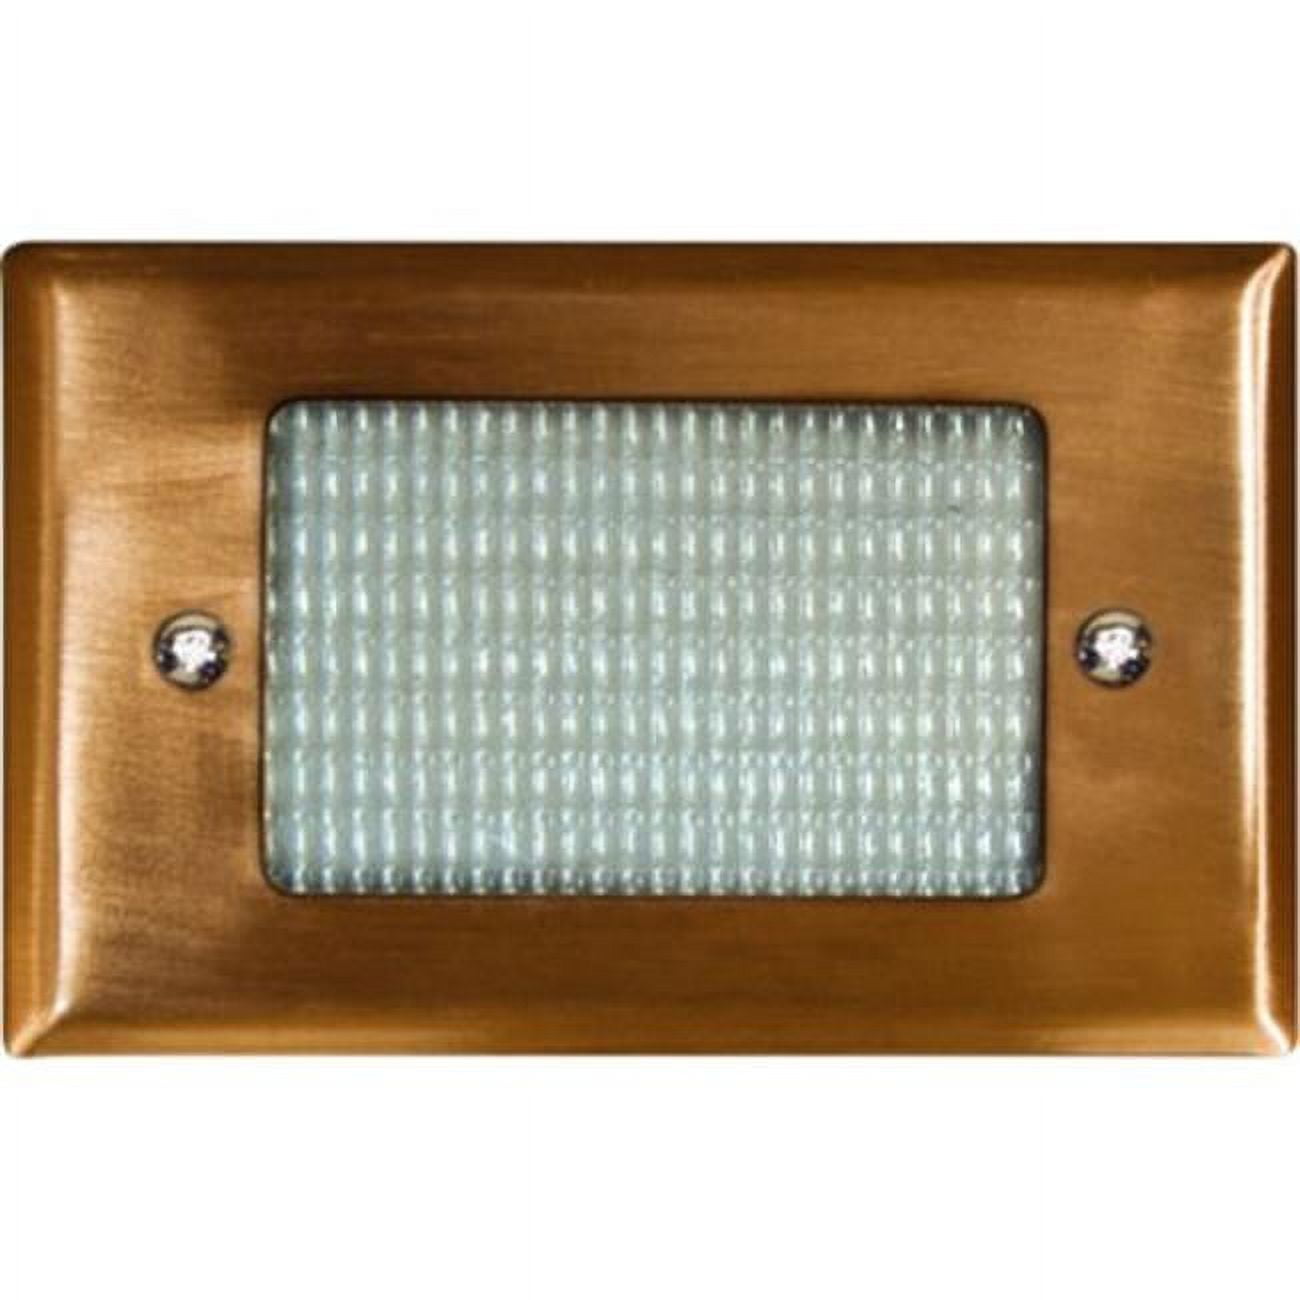 Recessed Open Face Brick, Step & Wall Light, Copper